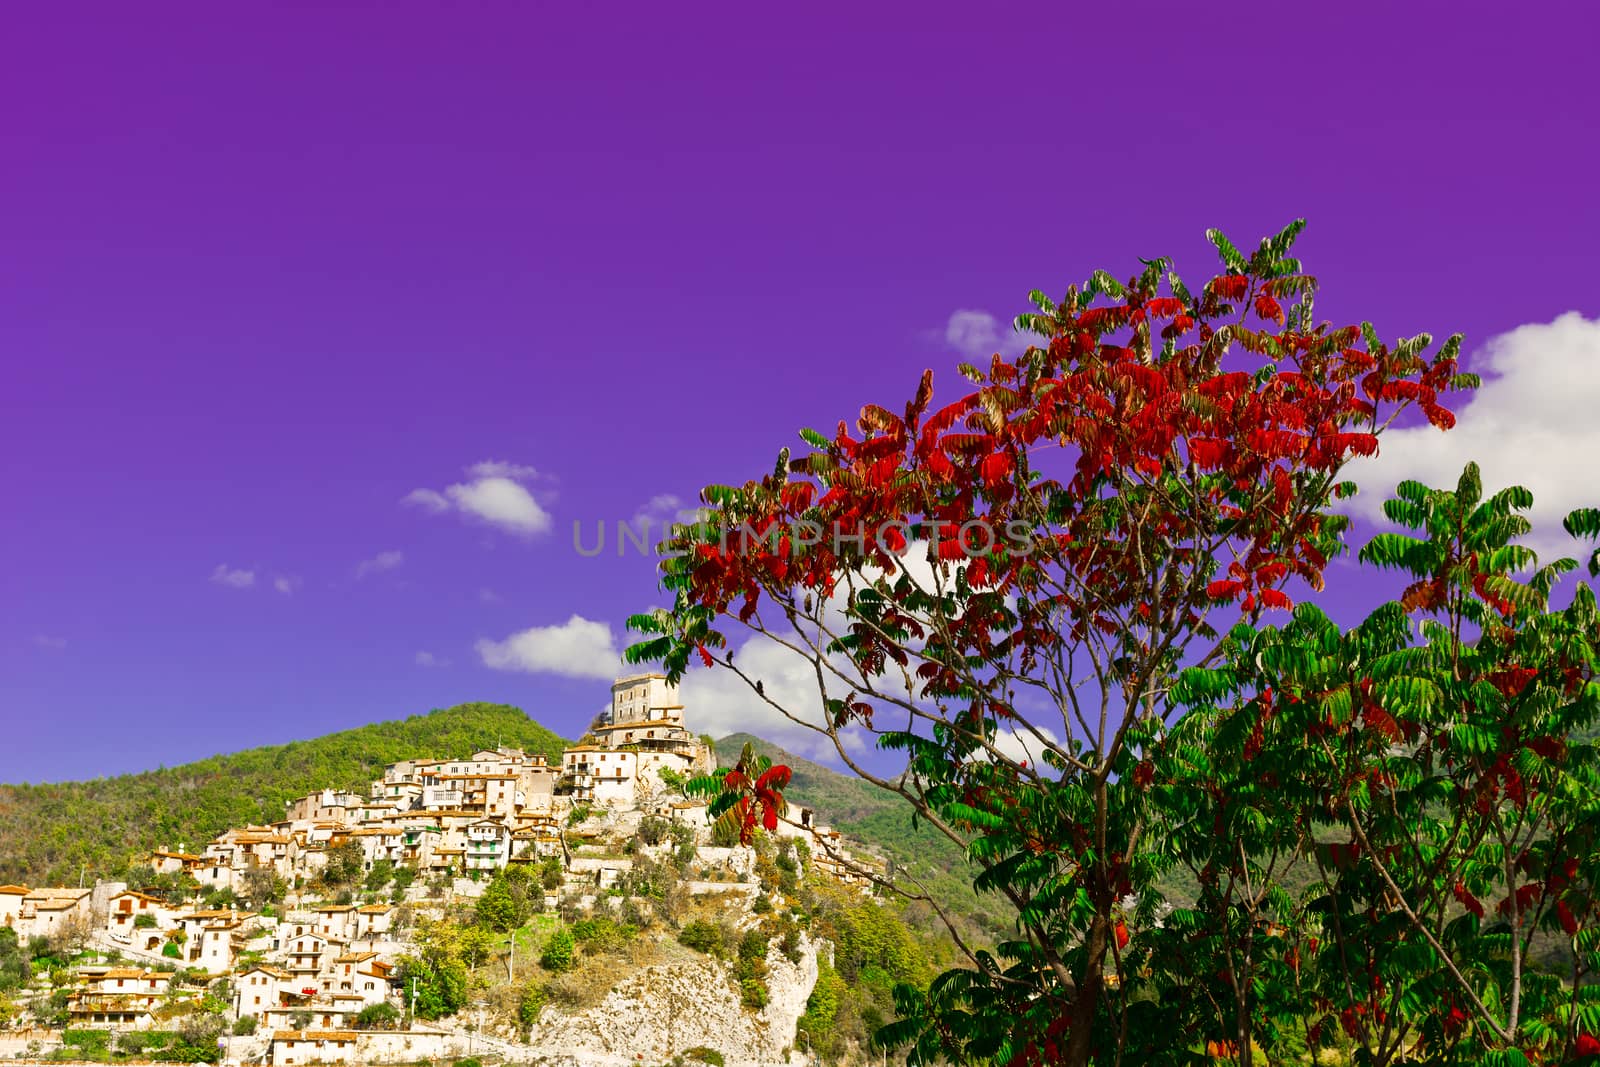 Red Leaves on the Background of Medieval Italian City on a Hilltop 